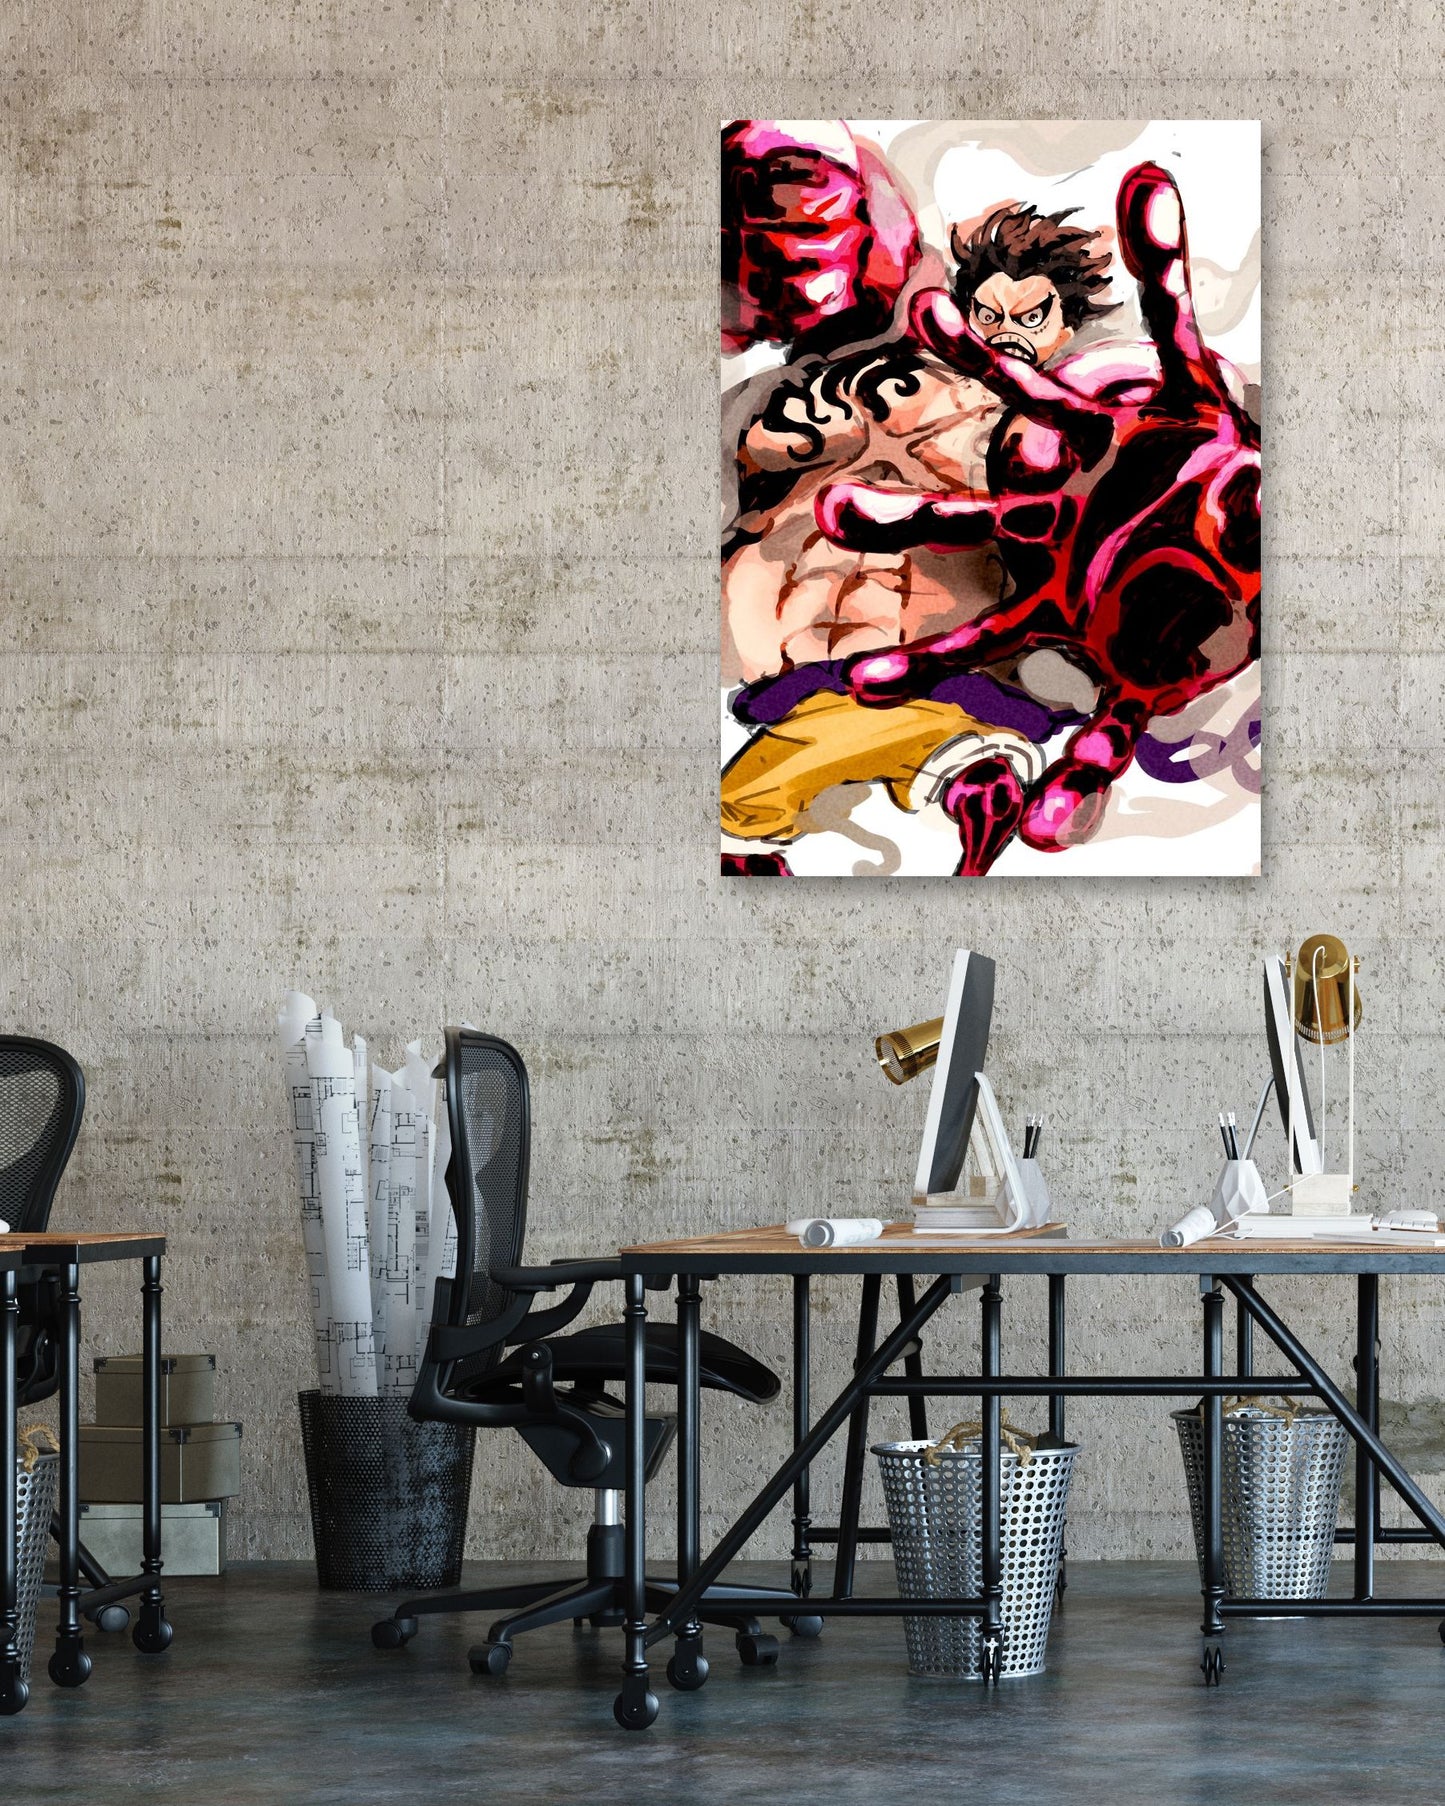 Luffy 19 - @UPGallery